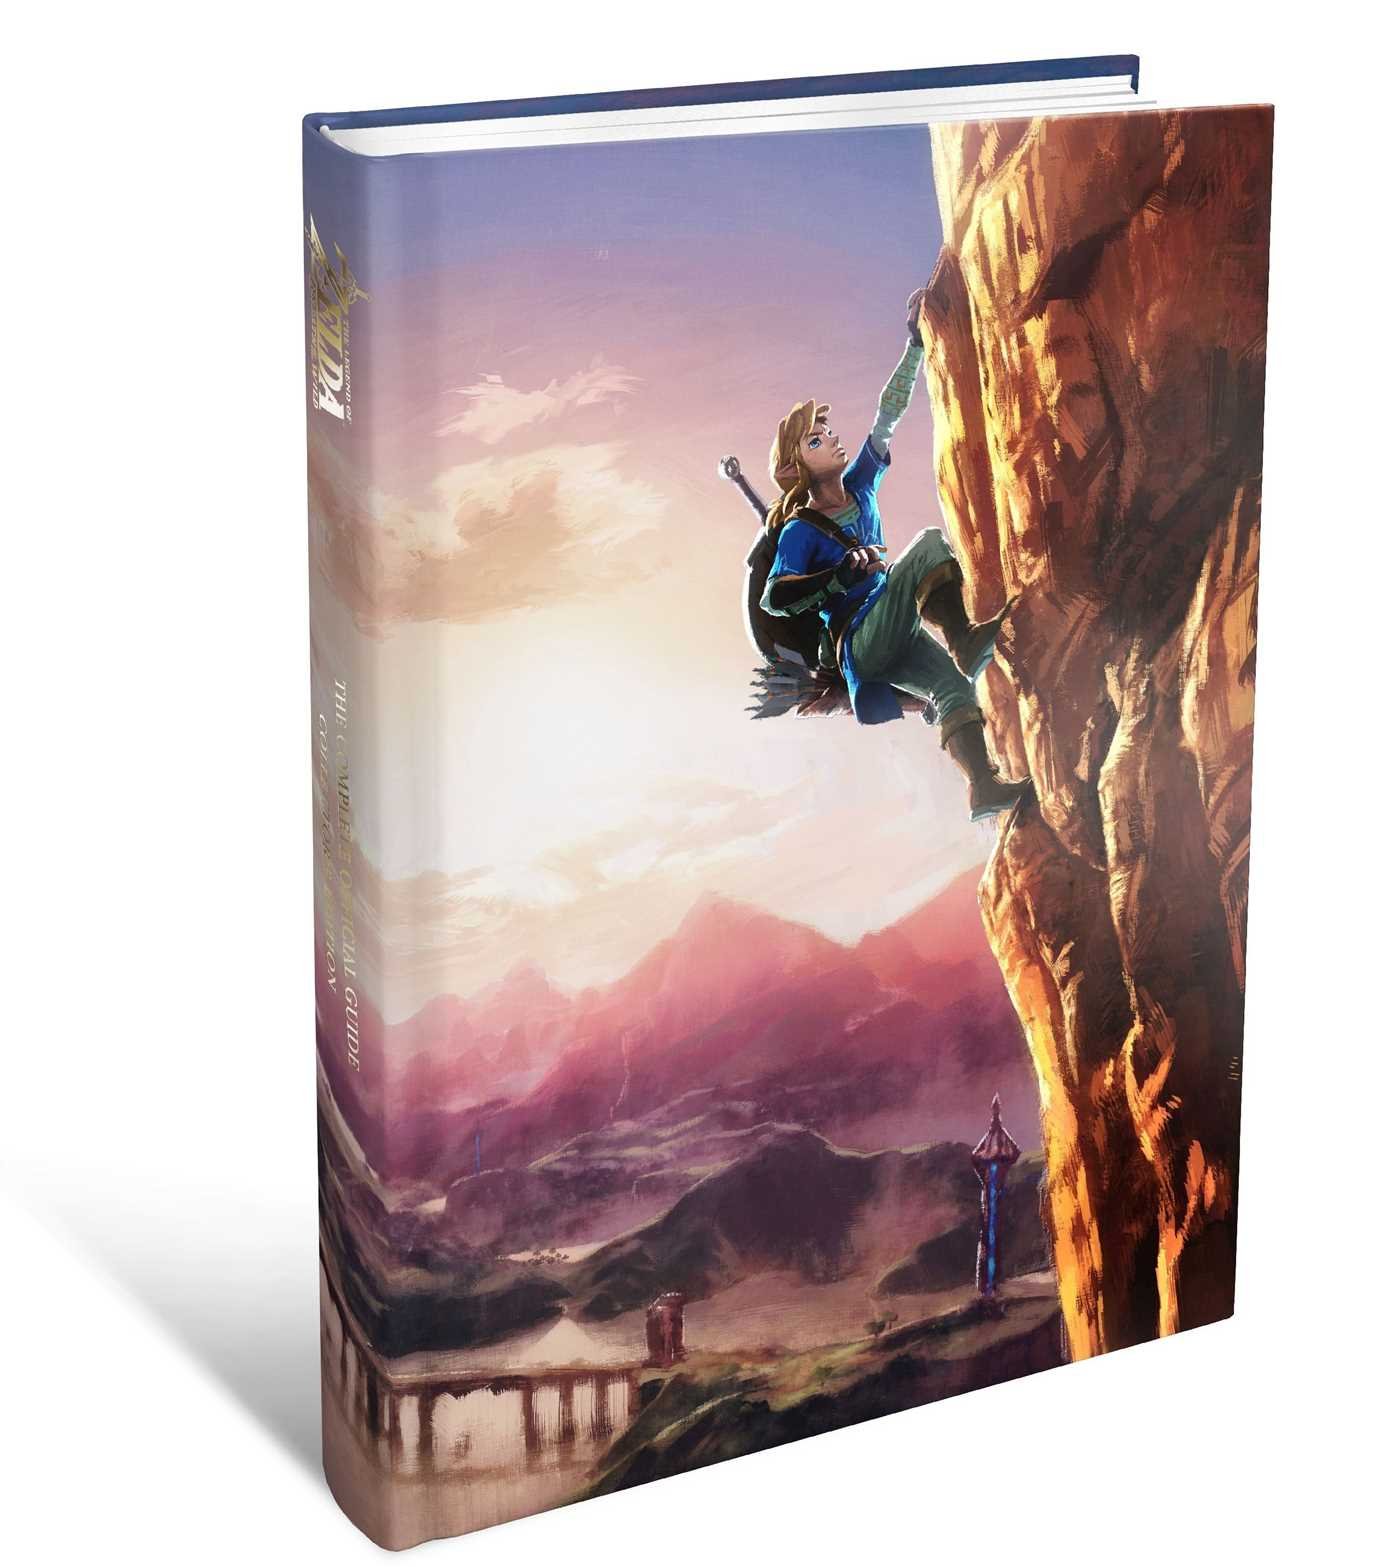 The Legend of Zelda Breath of the Wild Guide